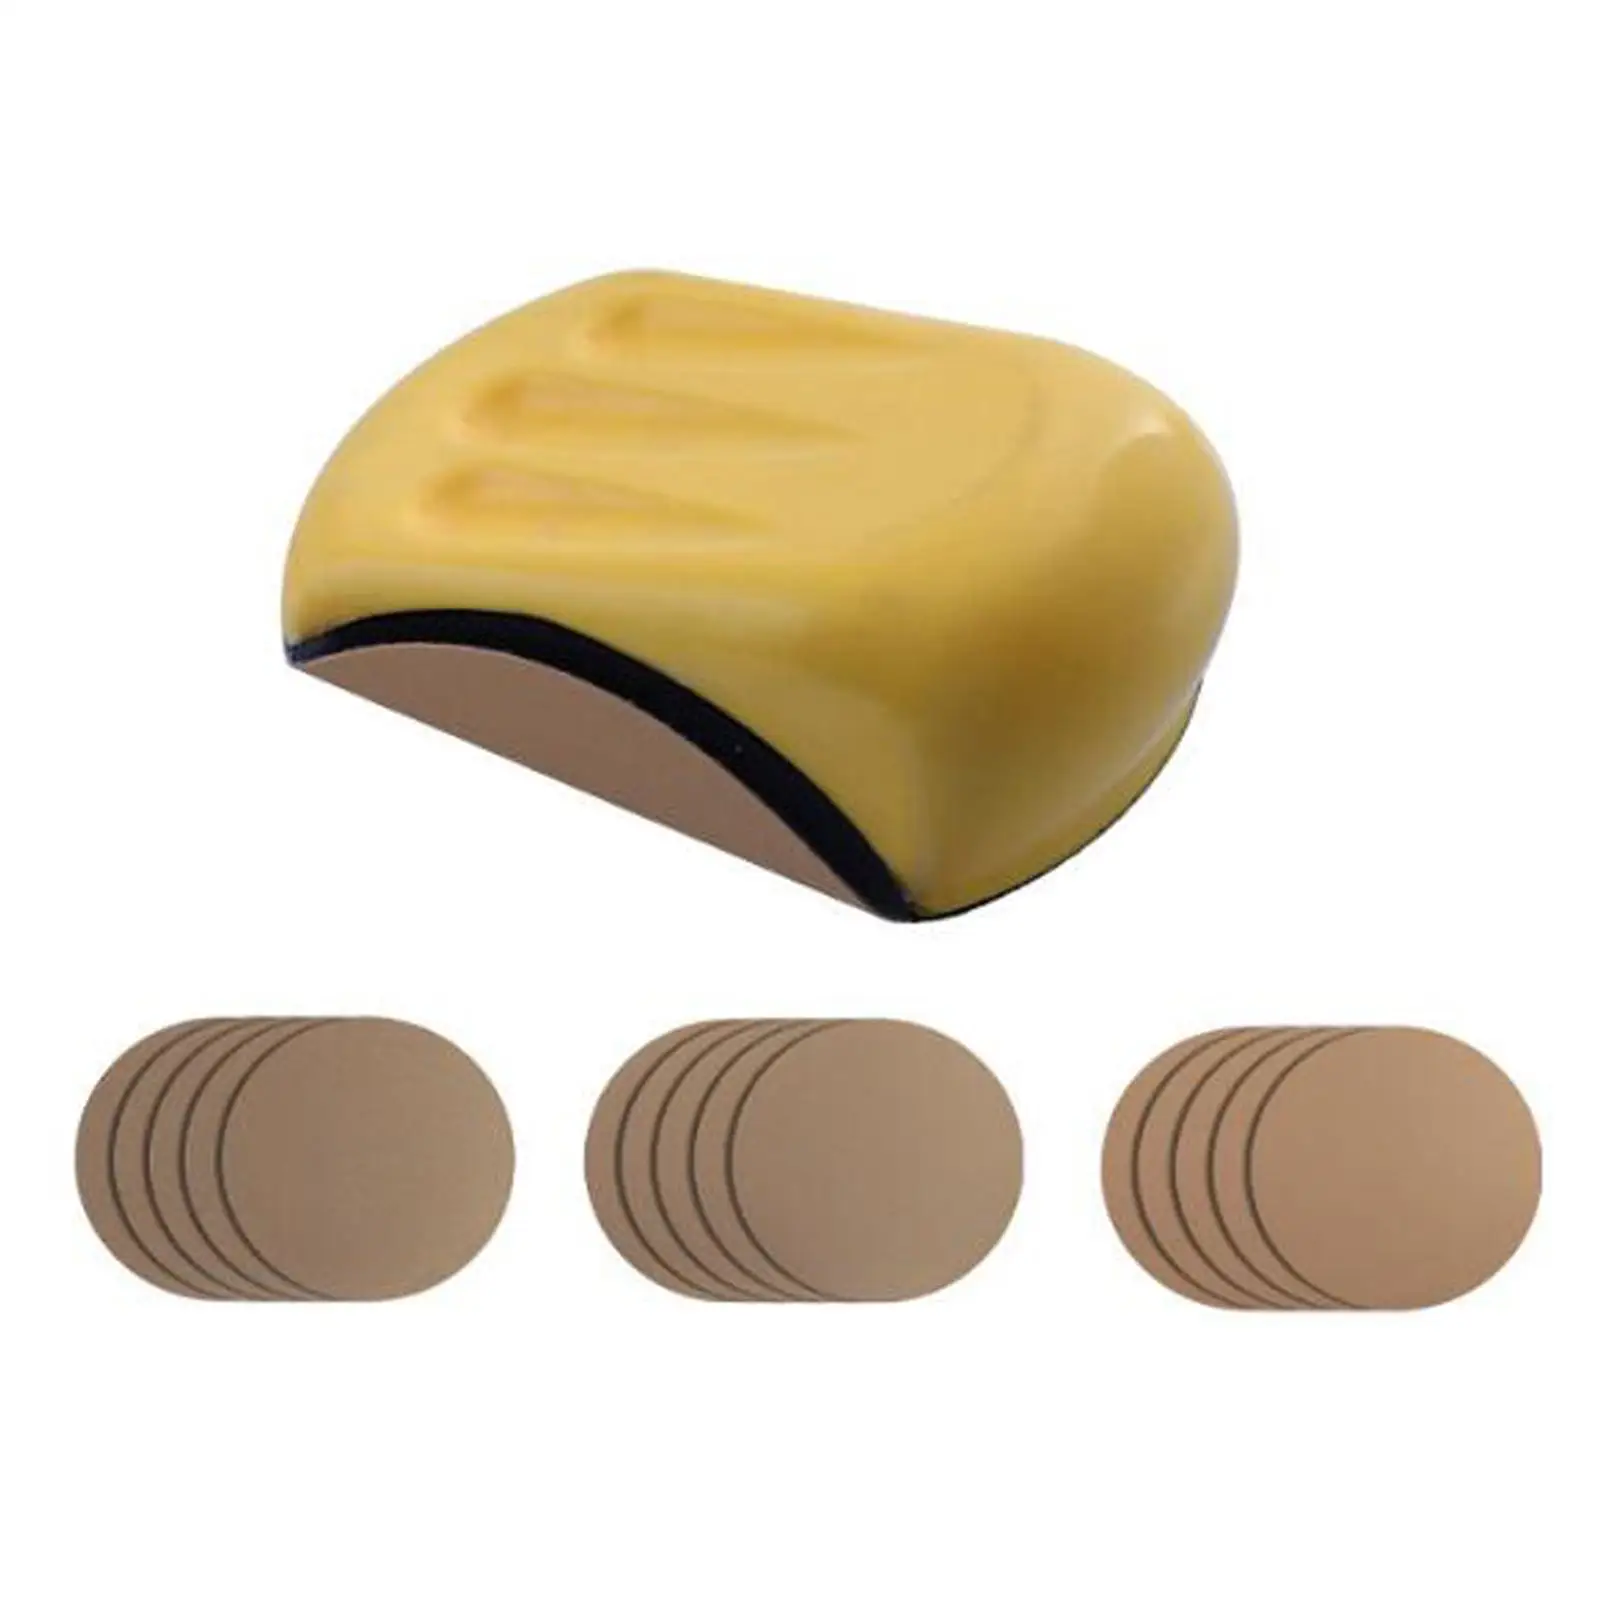 Sanding Kit with Replacement Sandpaper Sanding Paper Detail Handle Sanding Tools for Small Projects Metals Polish